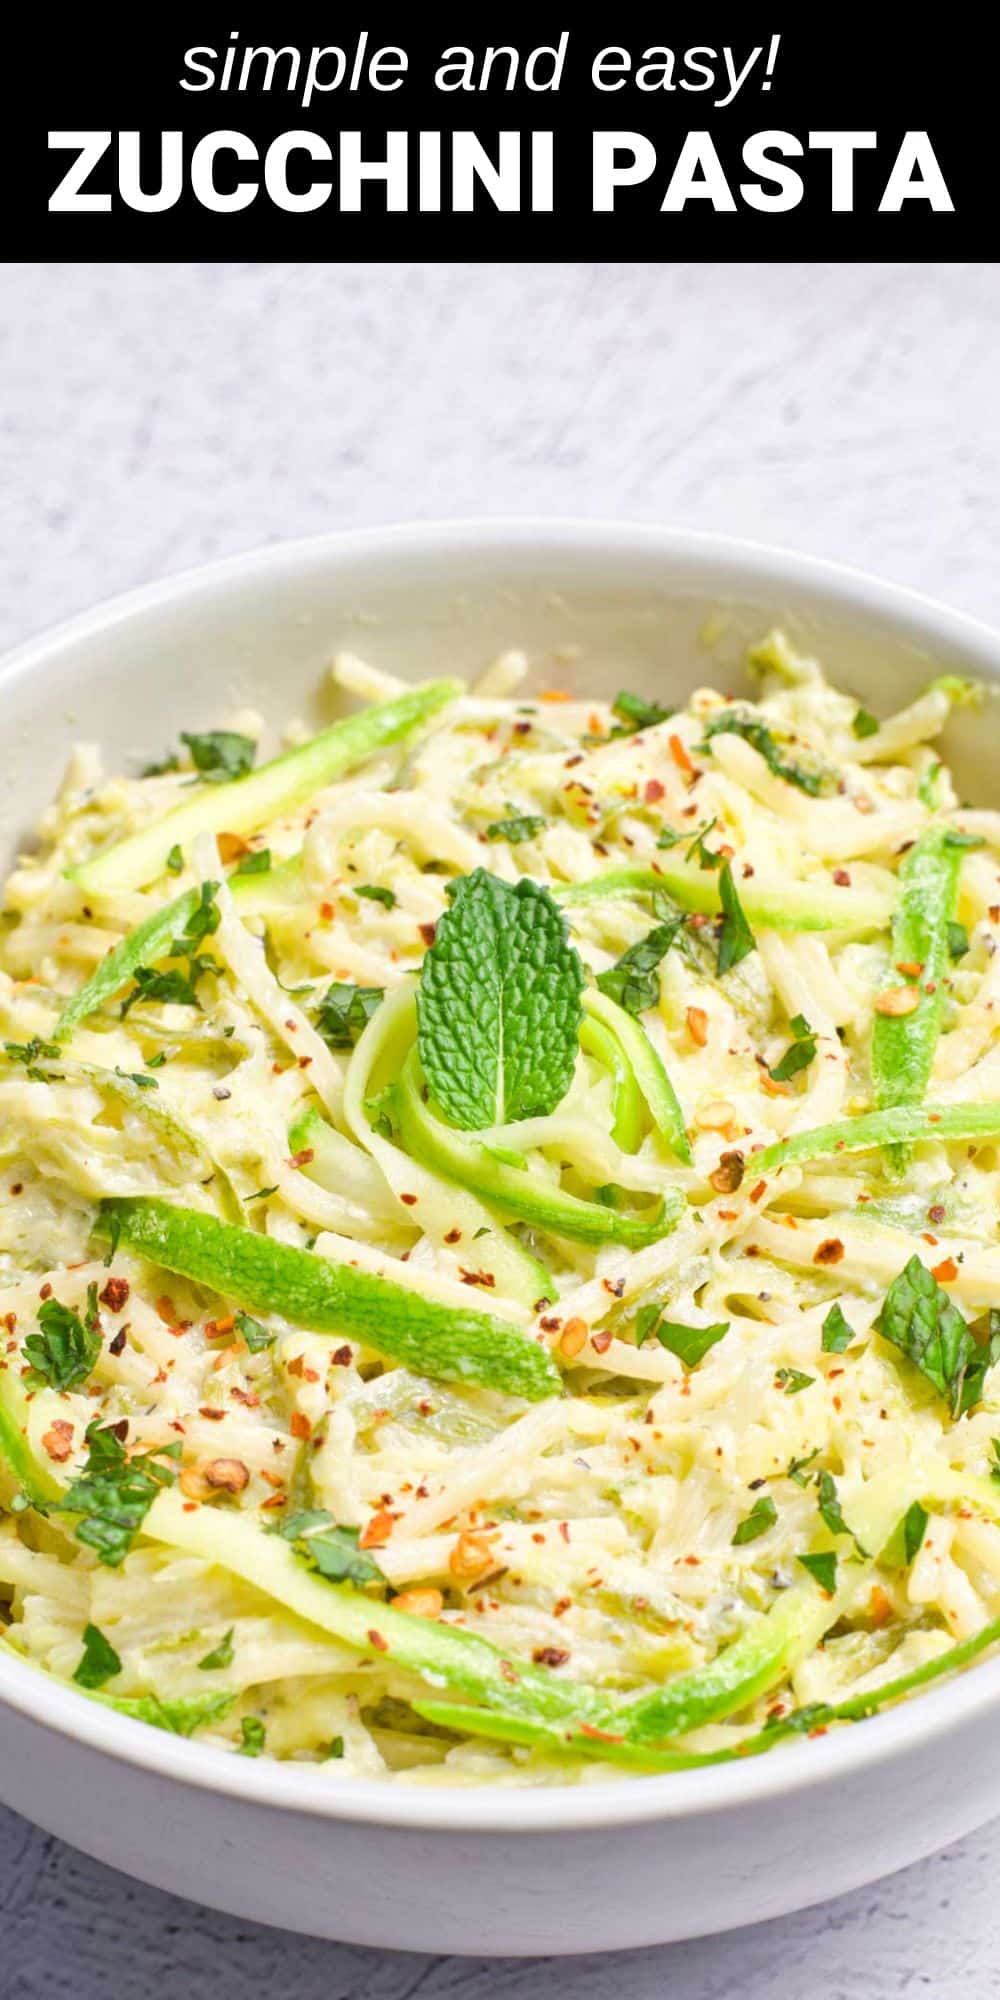 This recipe for Zucchini Pasta makes a delicious, creamy main dish or decadent side, that combines freshly grated zucchini and tender pasta, tossed with rich homemade cream sauce. It's a simple, easy and incredibly tasty pasta dish the whole family will love. 